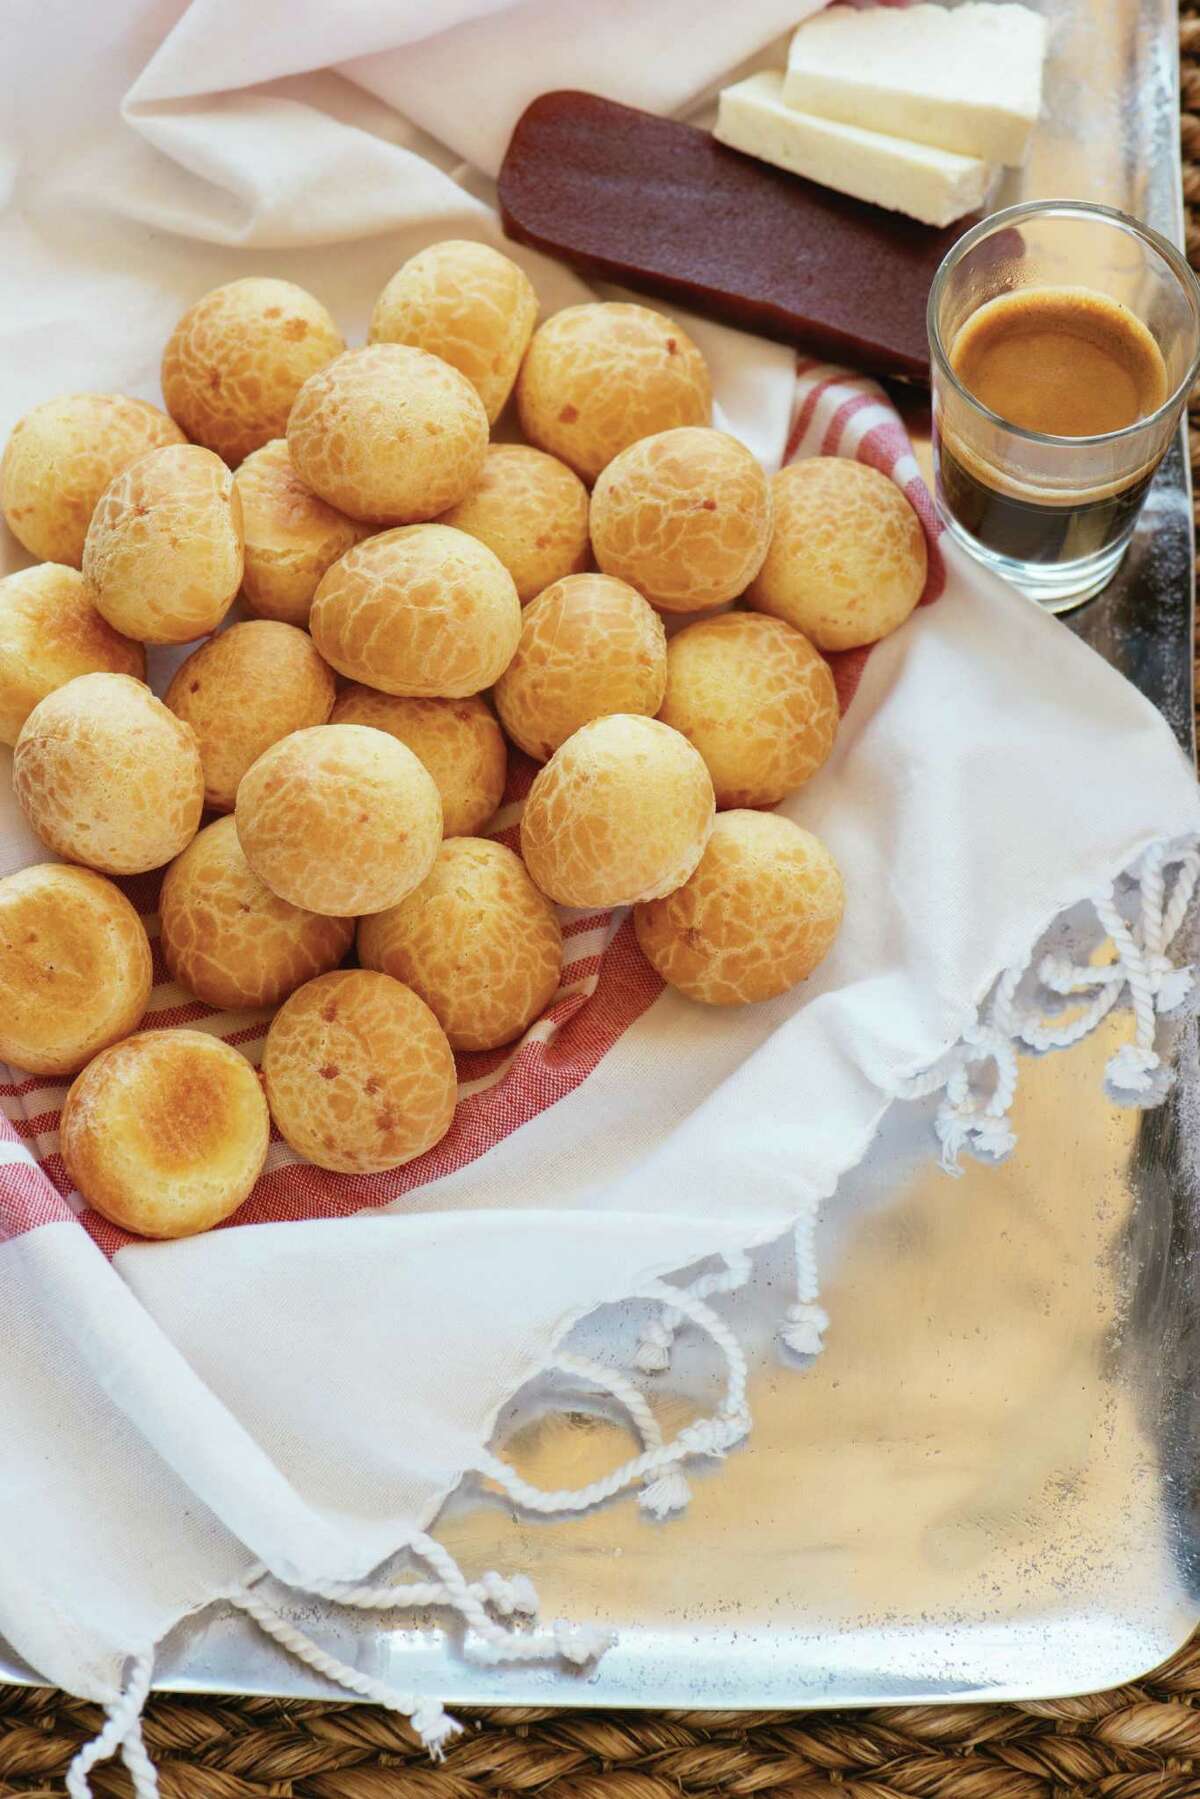 Pao de queijo (Brazilian cheese bread) was one of the top recipes of the year.